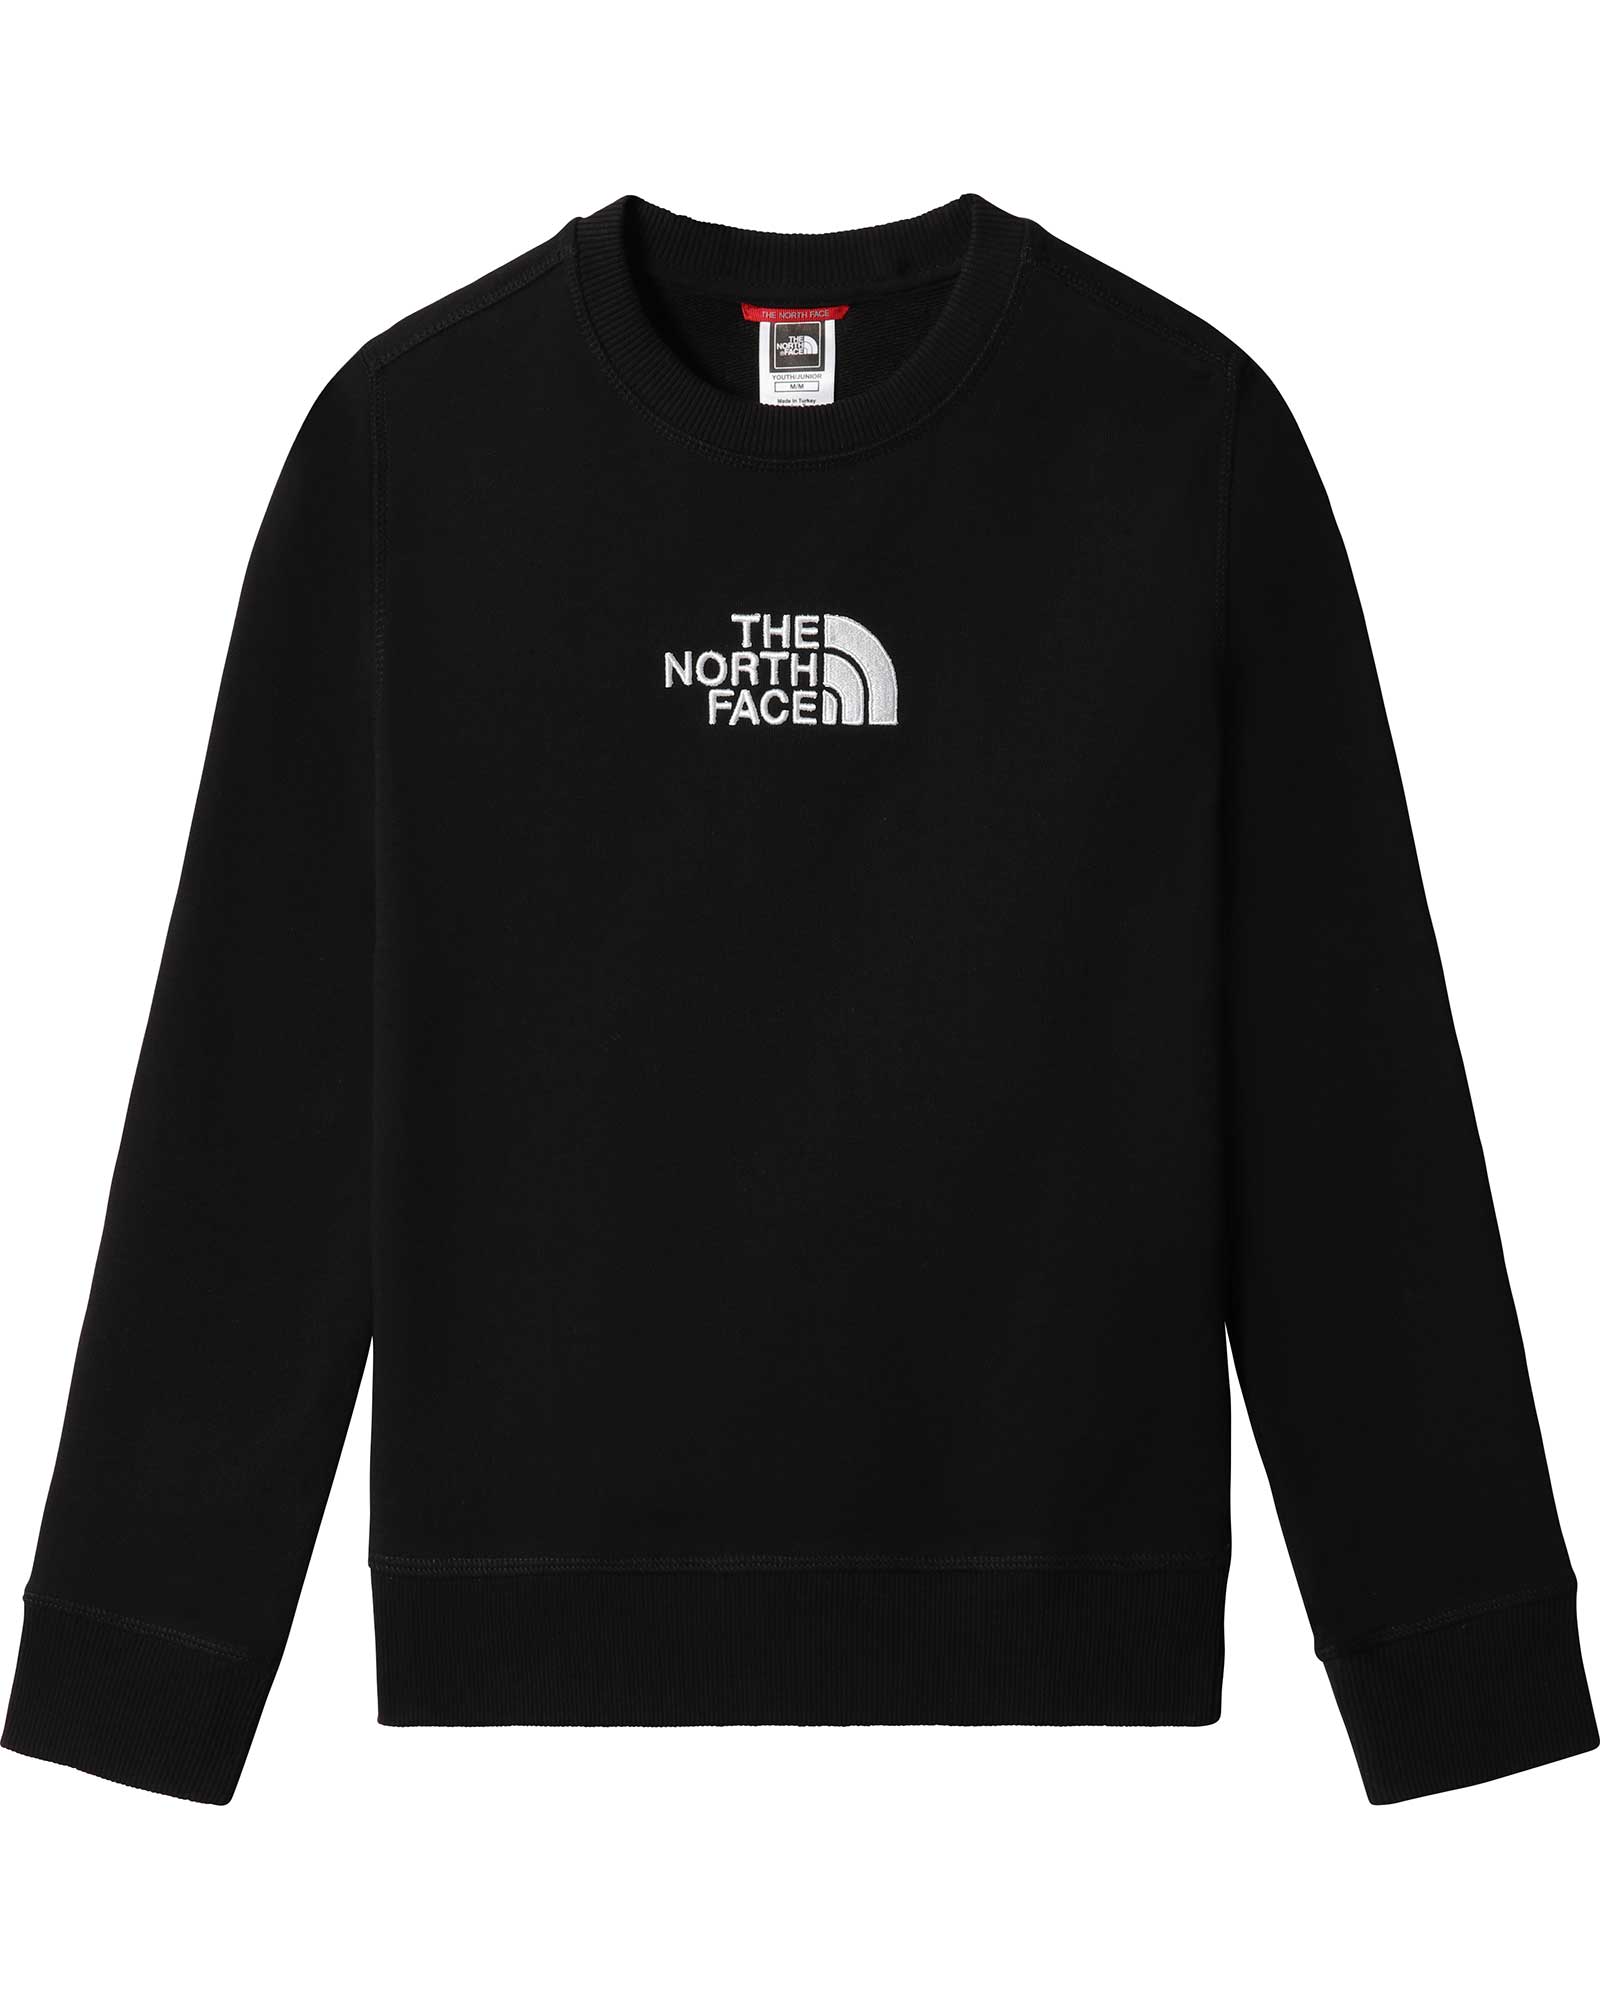 Product image of The North Face Youth Youth Drew Peak Kids' Light Crew